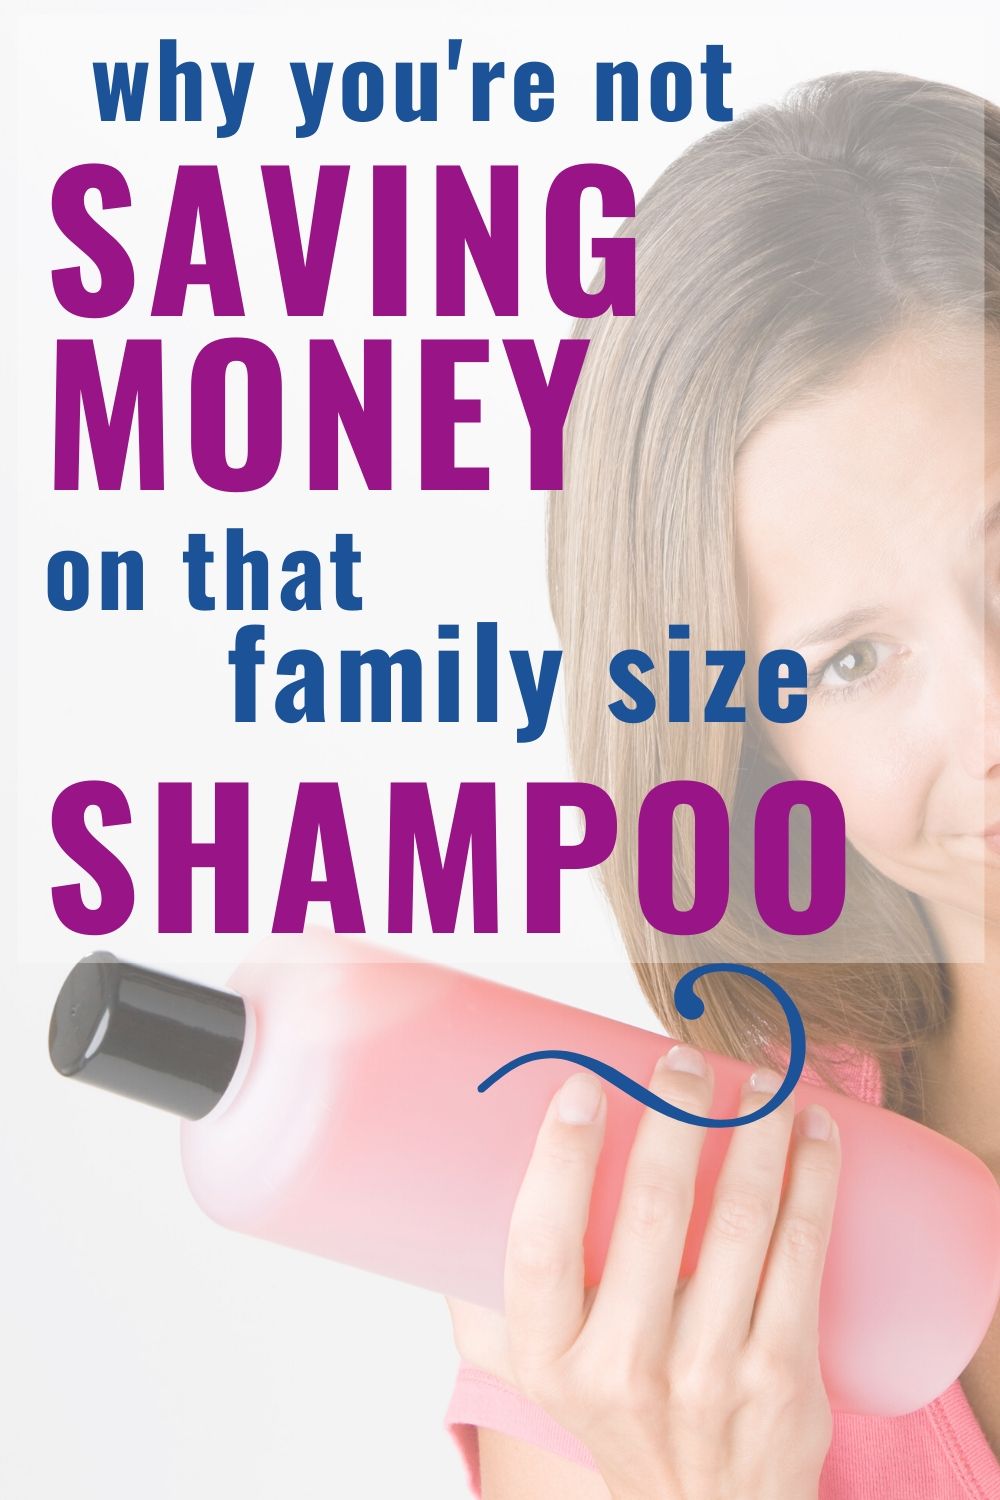 how to save money on family size shampoo pin